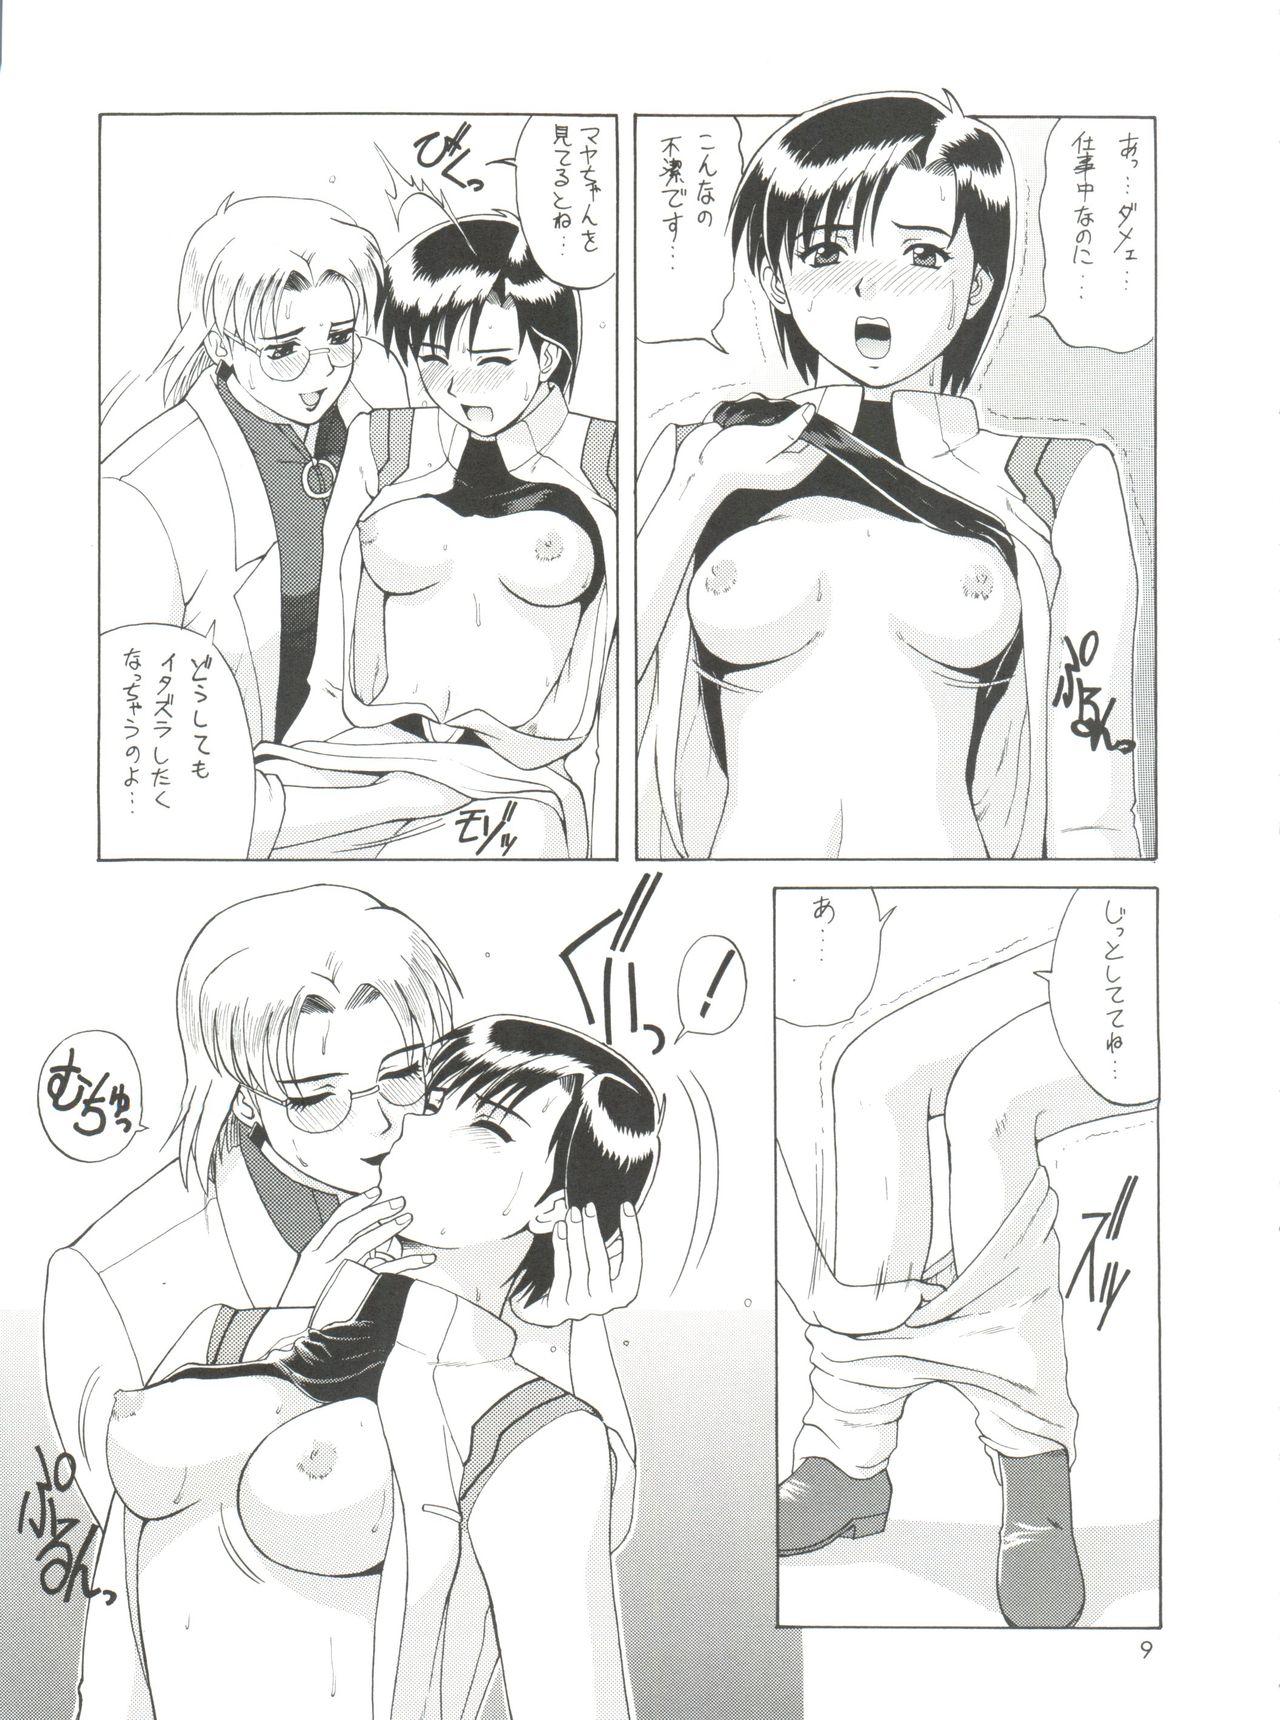 Playing Suite For My Sweet Shinteiban - Neon genesis evangelion T Girl - Page 8